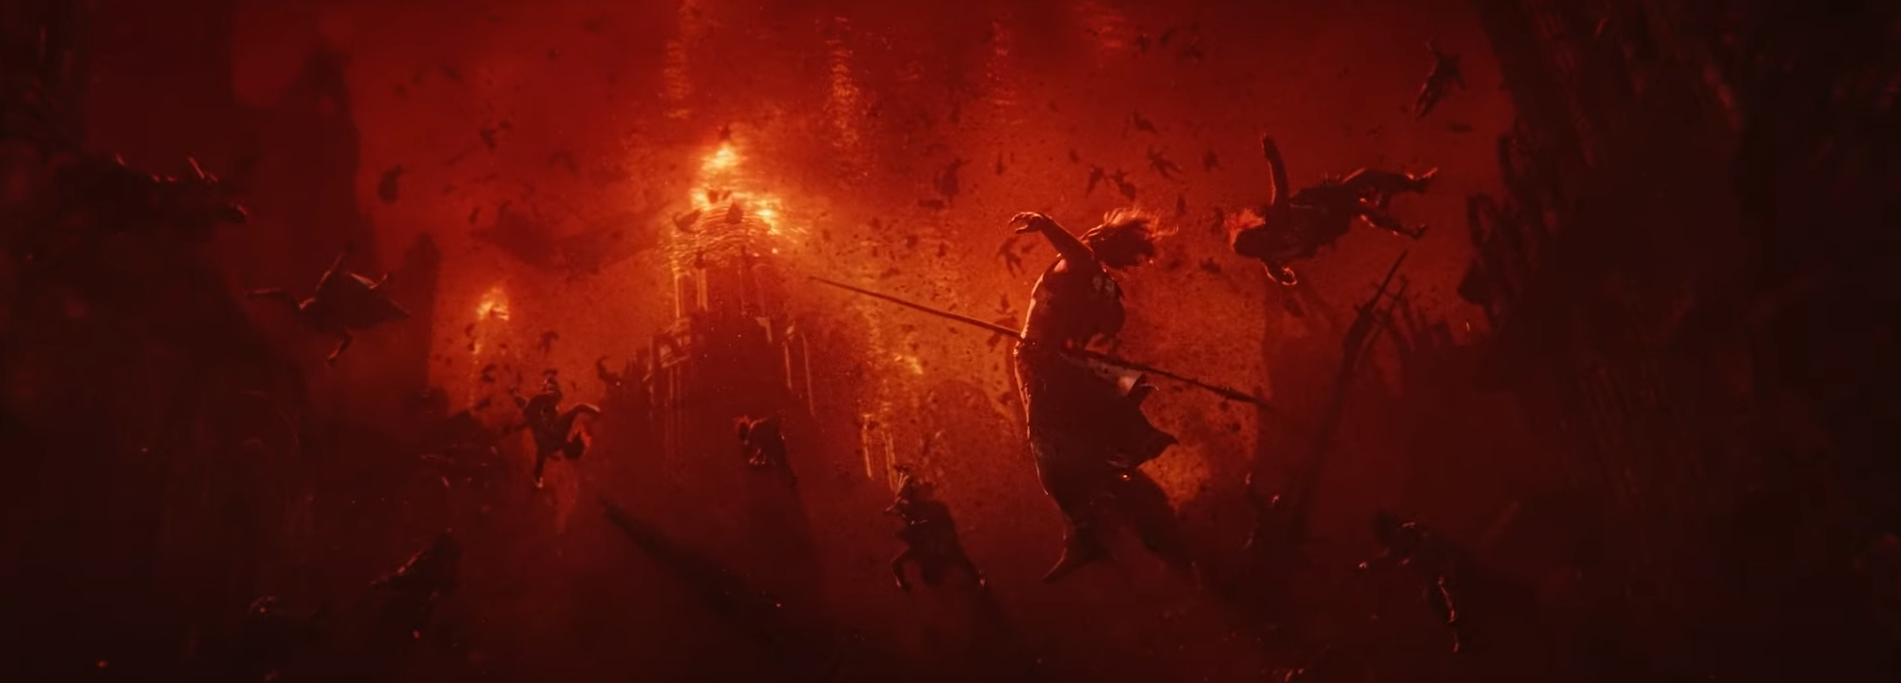 First trailer teases The Lord of the Rings: The Rings of Power TV show -  BBC News